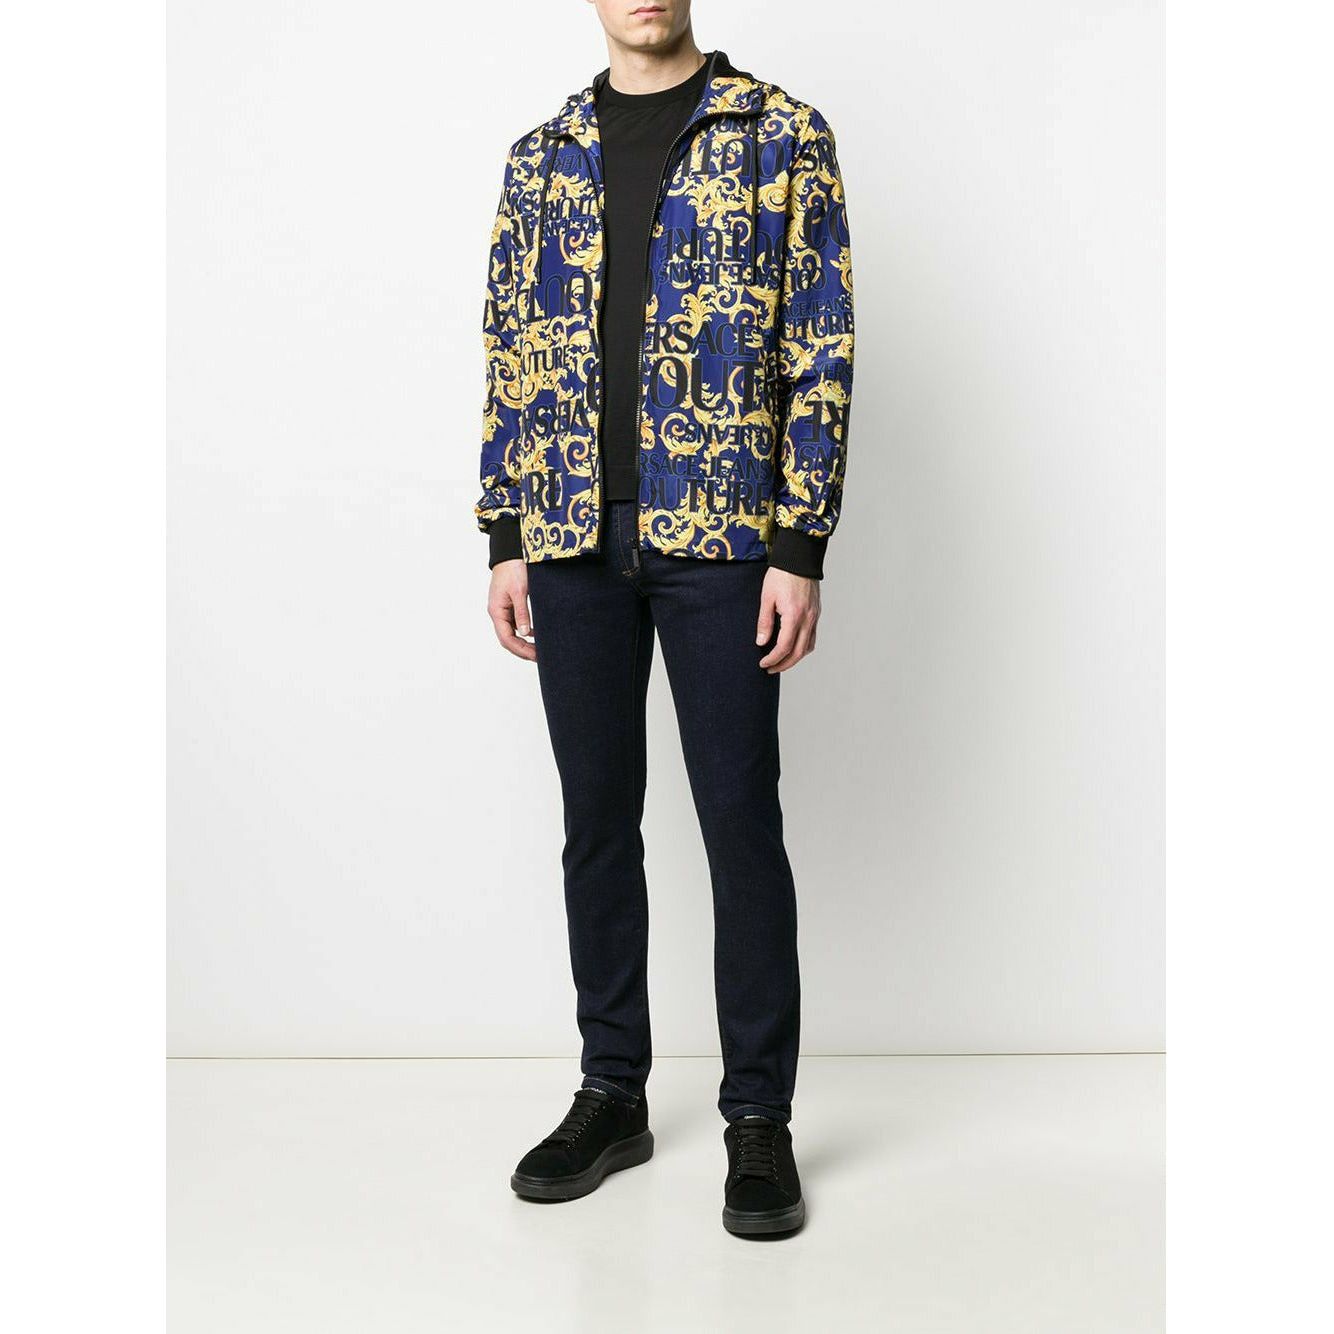 VERSACE JEANS COUTURE JACKET - Yooto